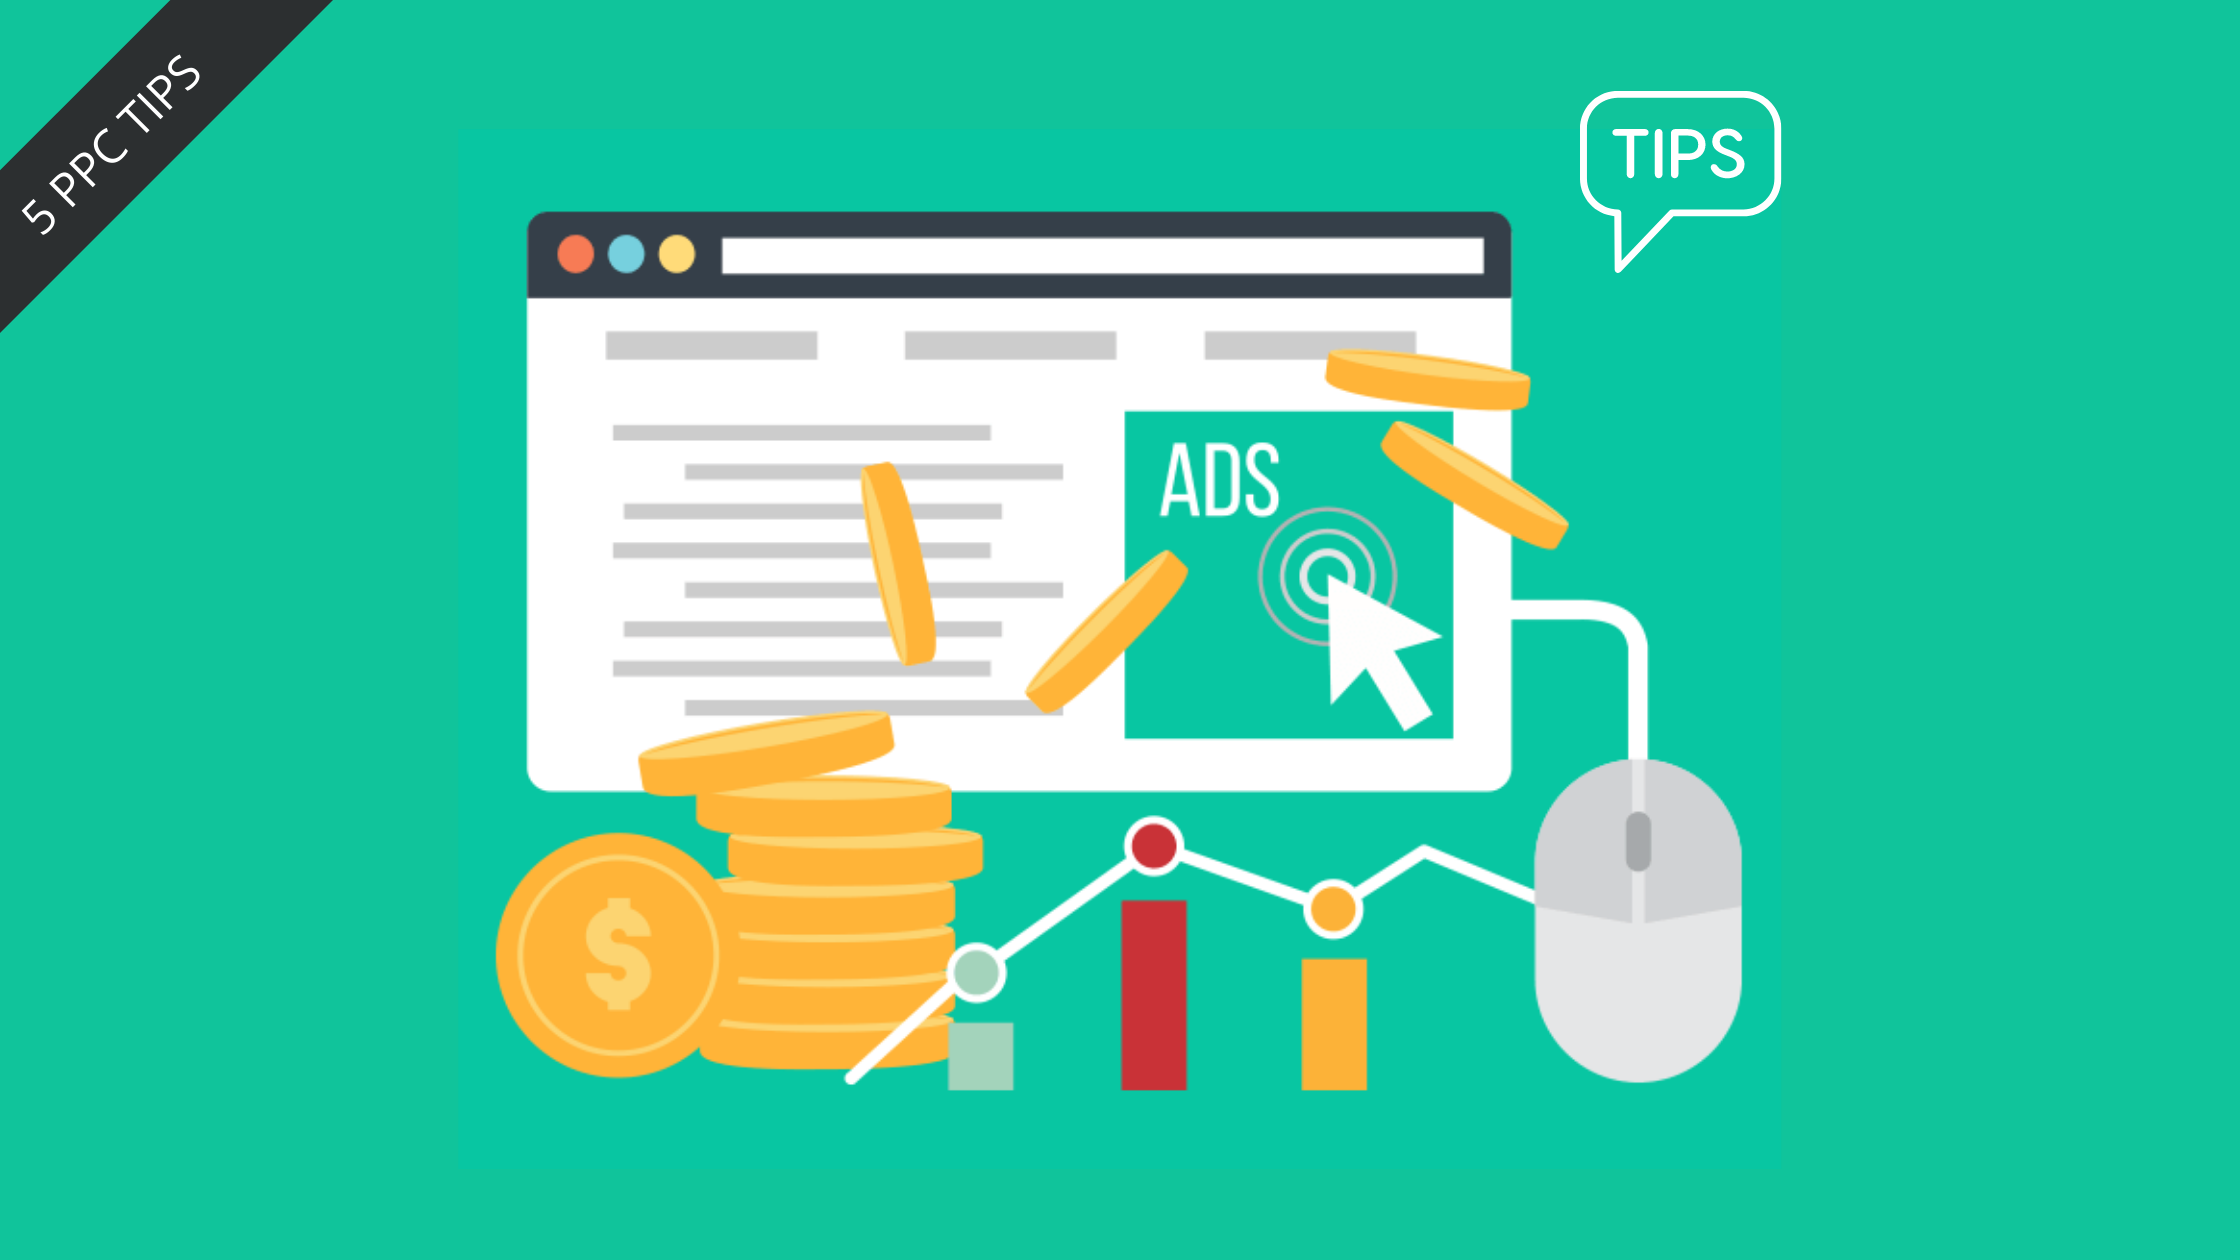 Tips for Managing PPC